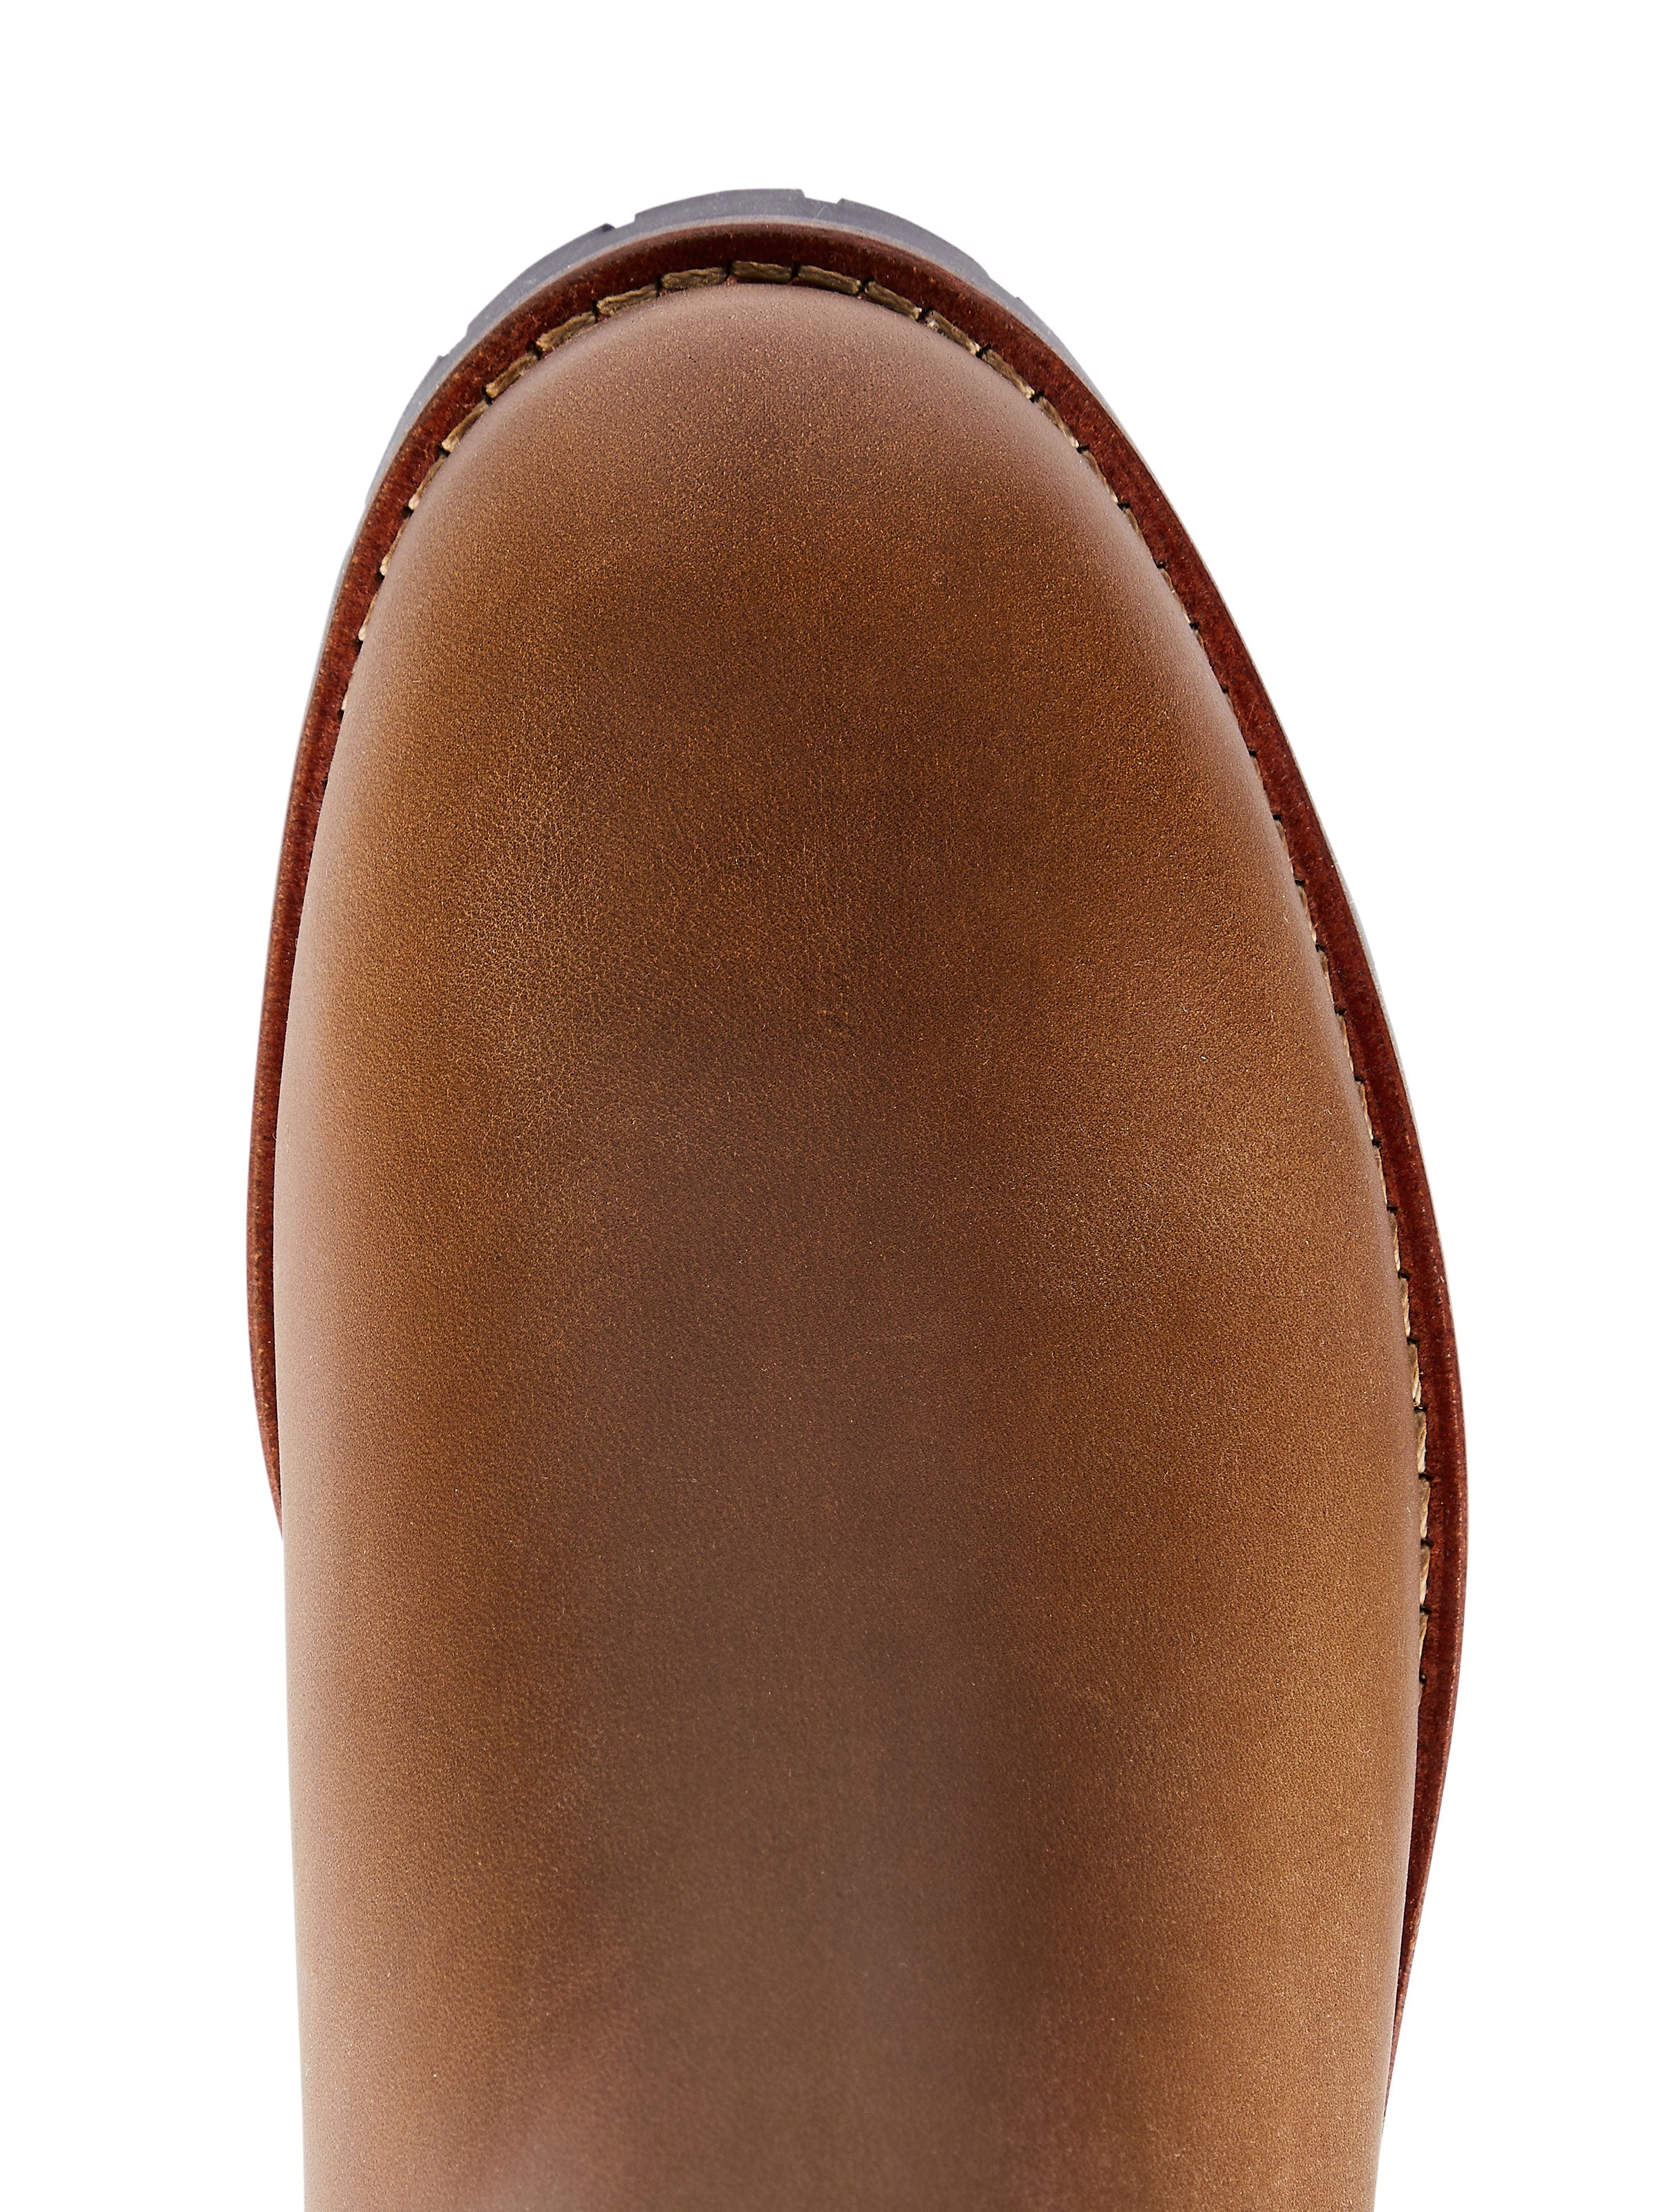 The Boudica Boot - Oak Leather